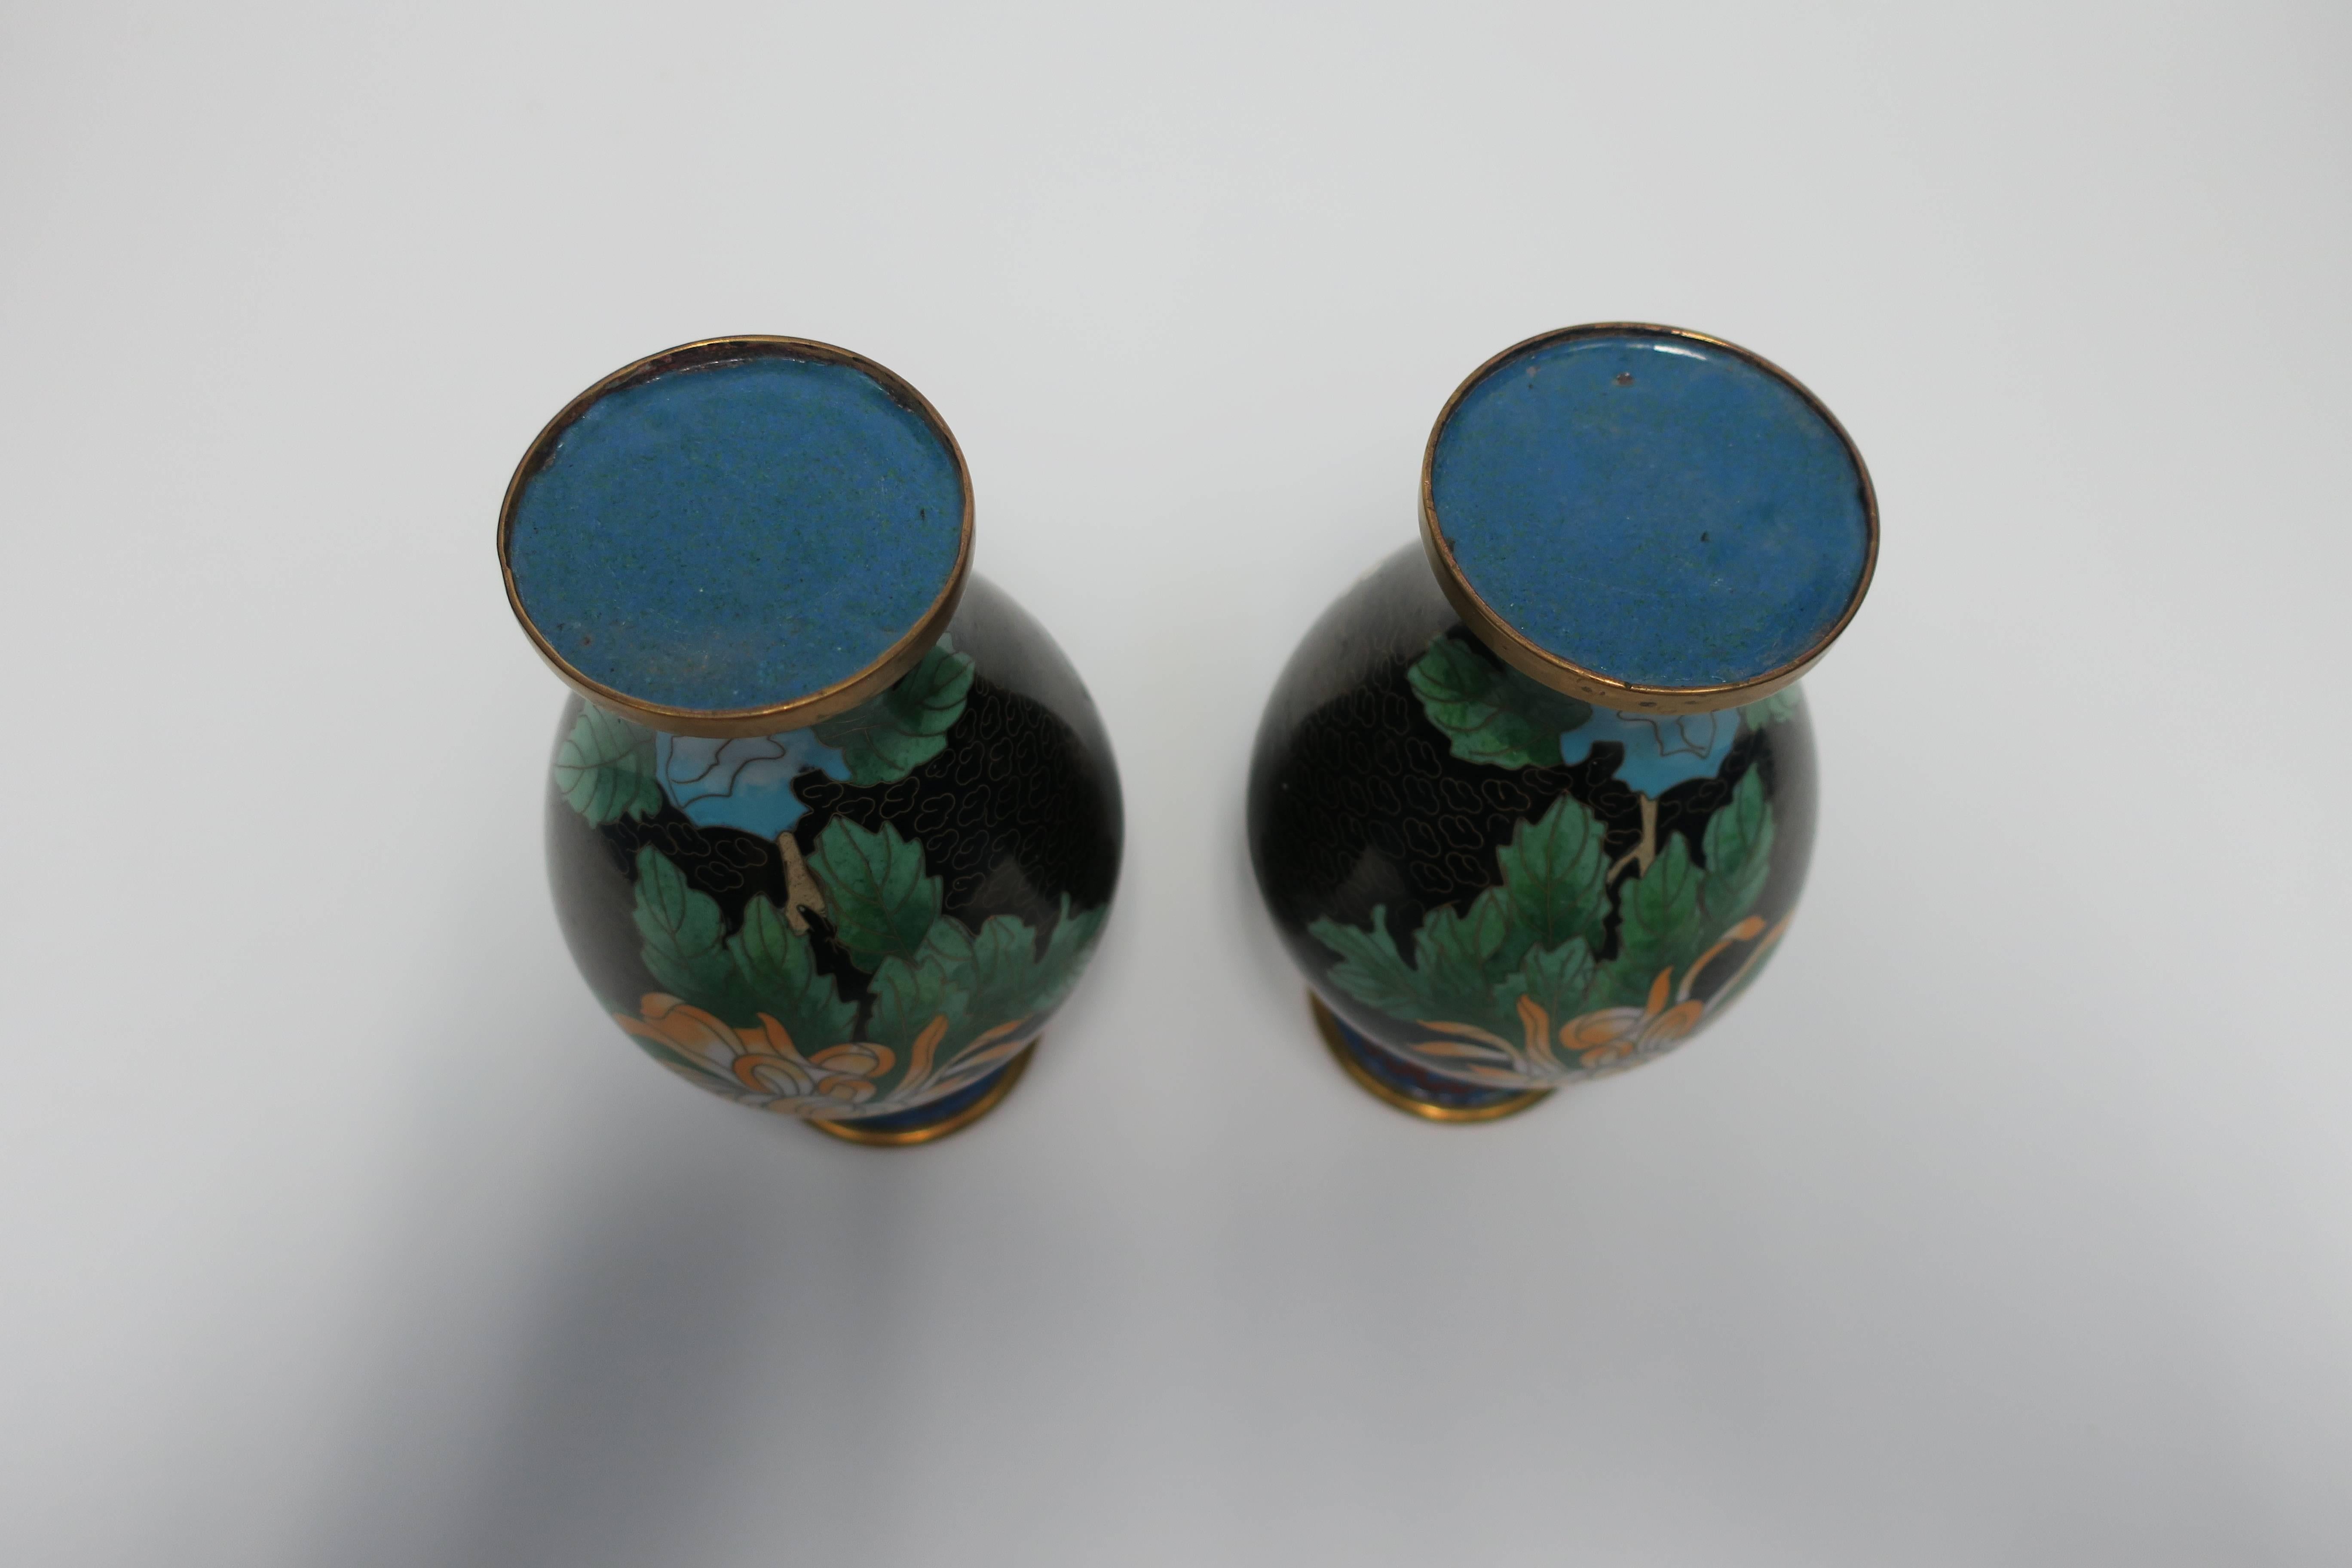 Black and Green Cloisonné́ Enamel and Brass Flower Vases, Pair For Sale 6